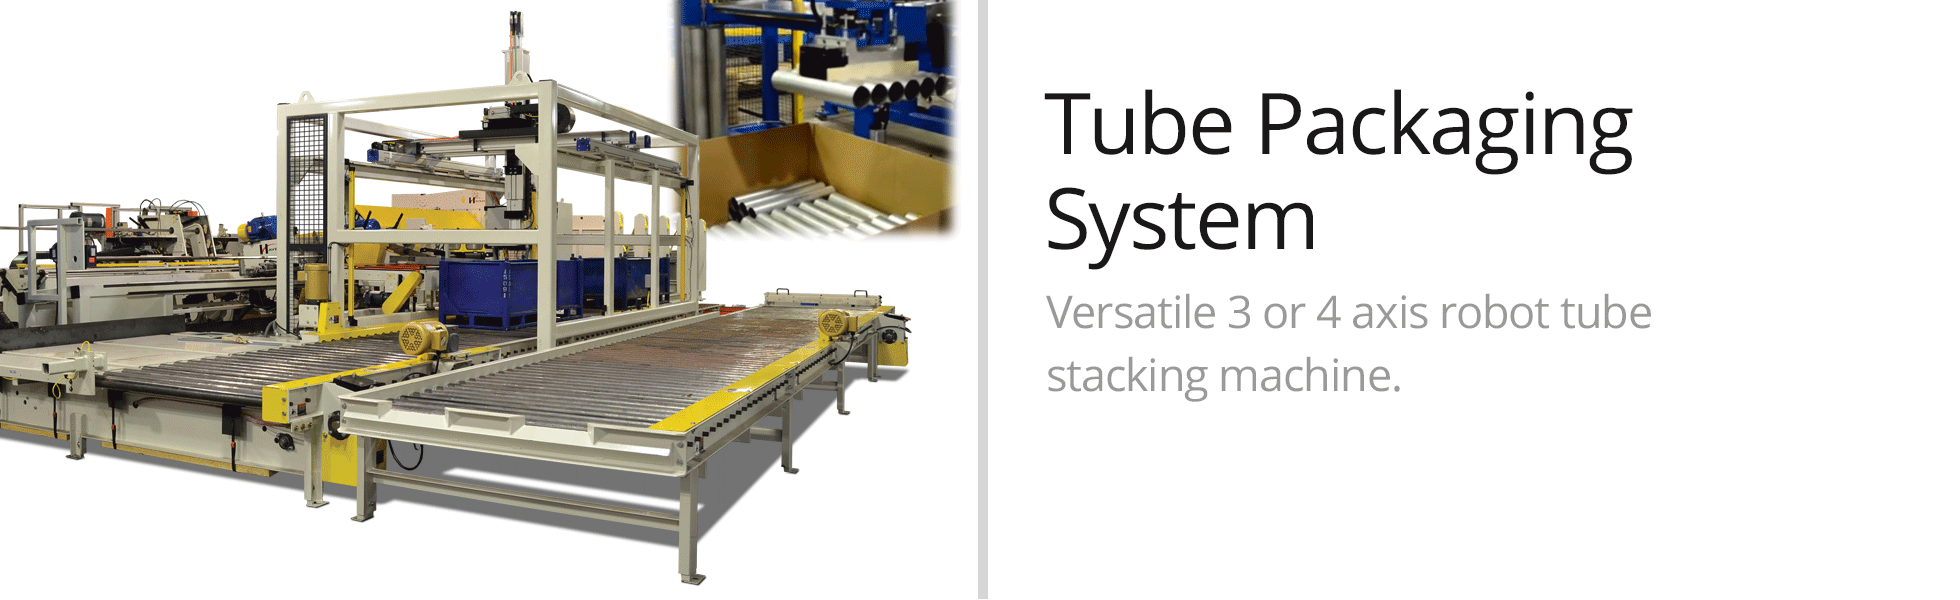 Haven Integrated Stacking/Packaging System - Video Header